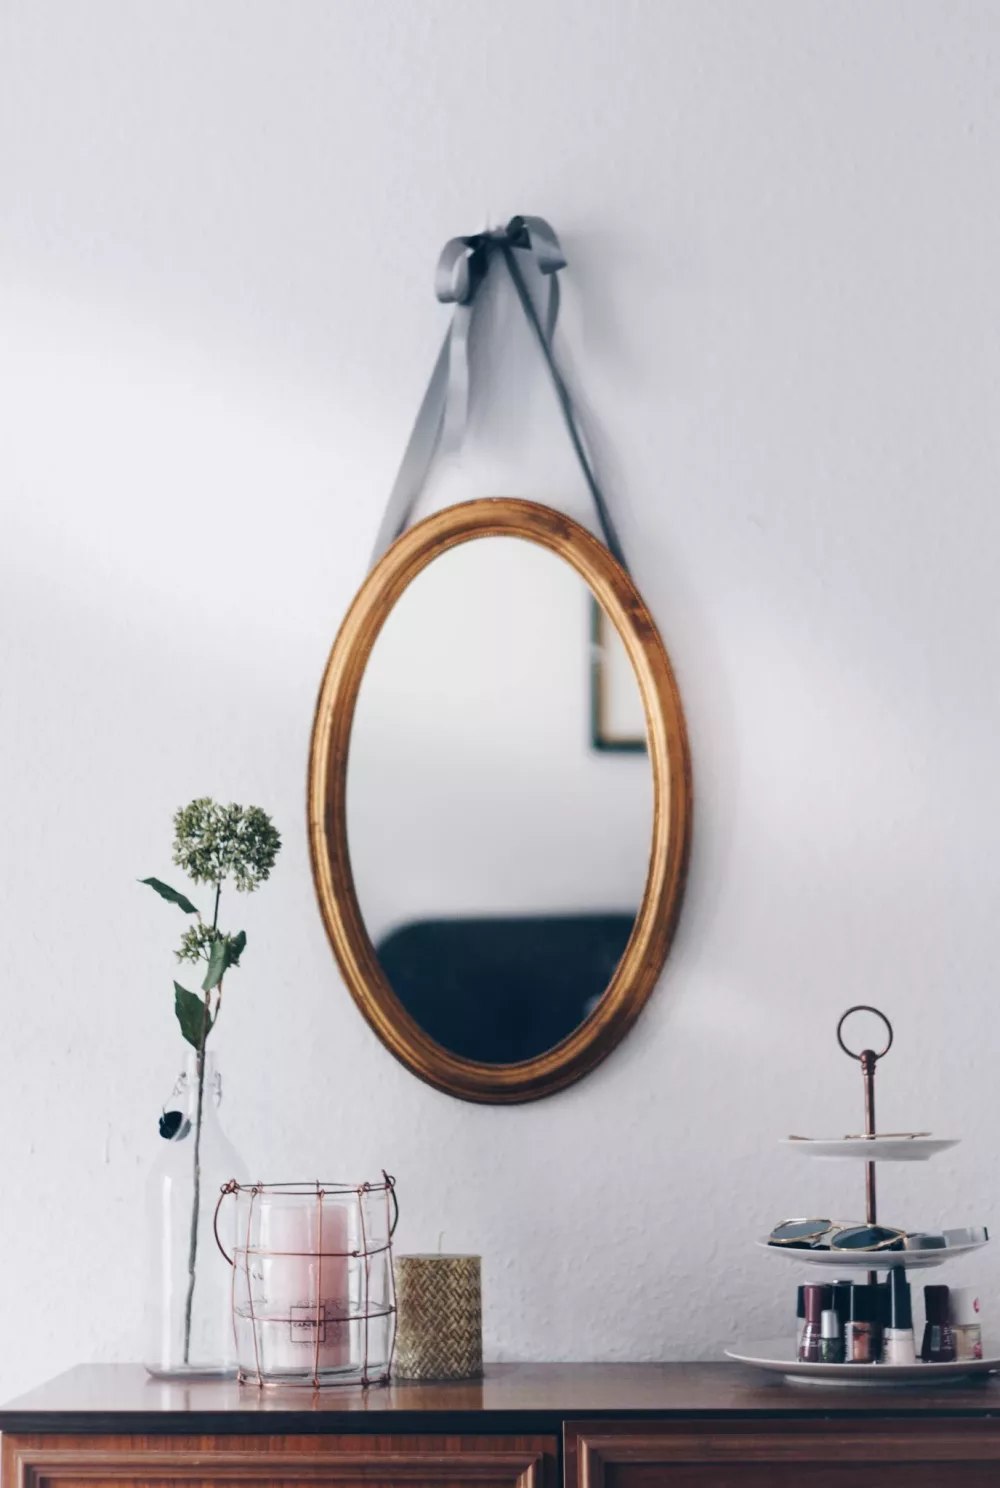 gilded oval mirror hanging on the wall